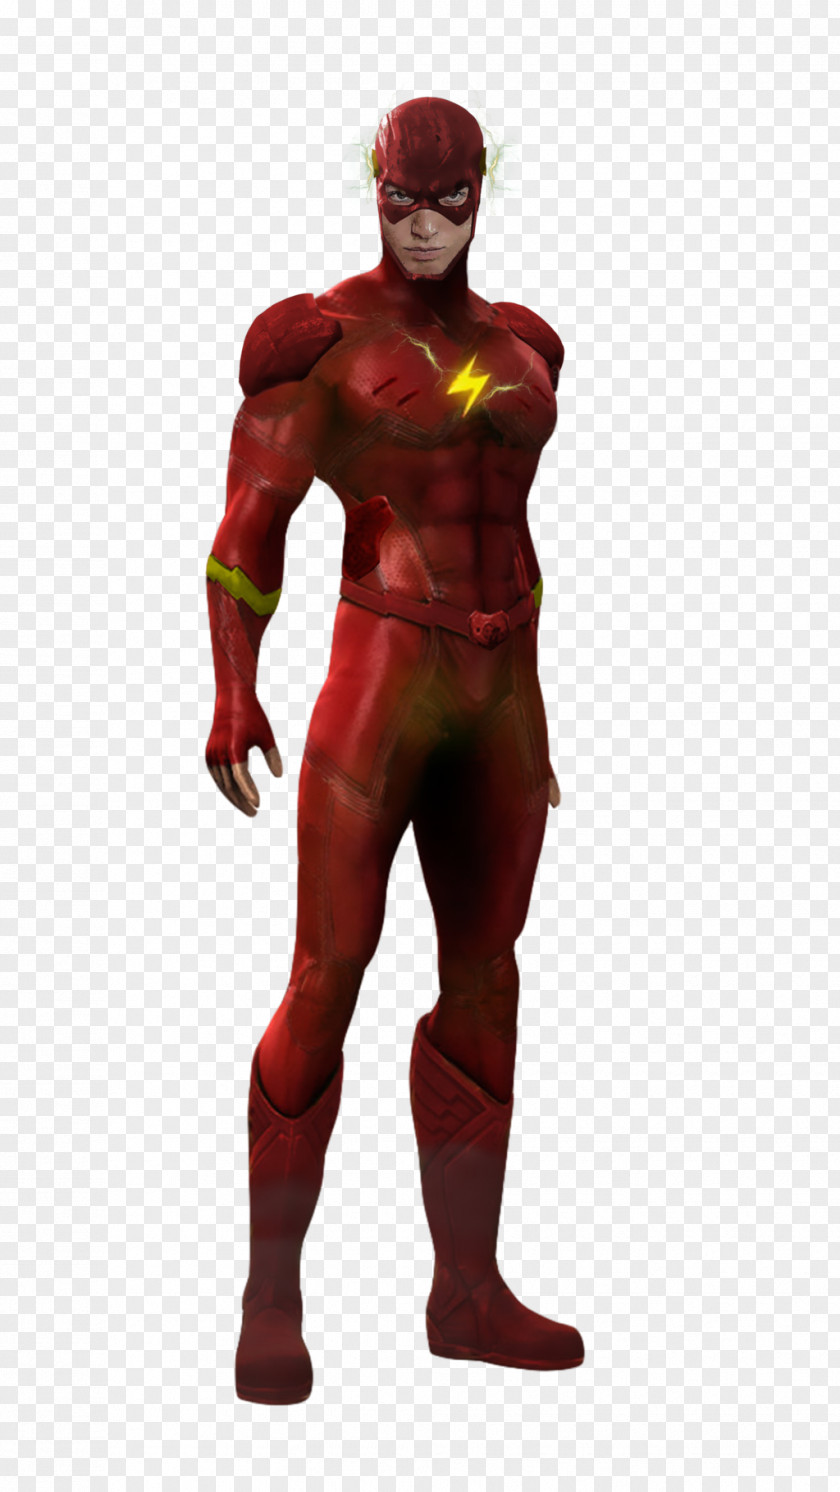 Exo Skeleton The Flash Eobard Thawne Black Canary Concept Art PNG